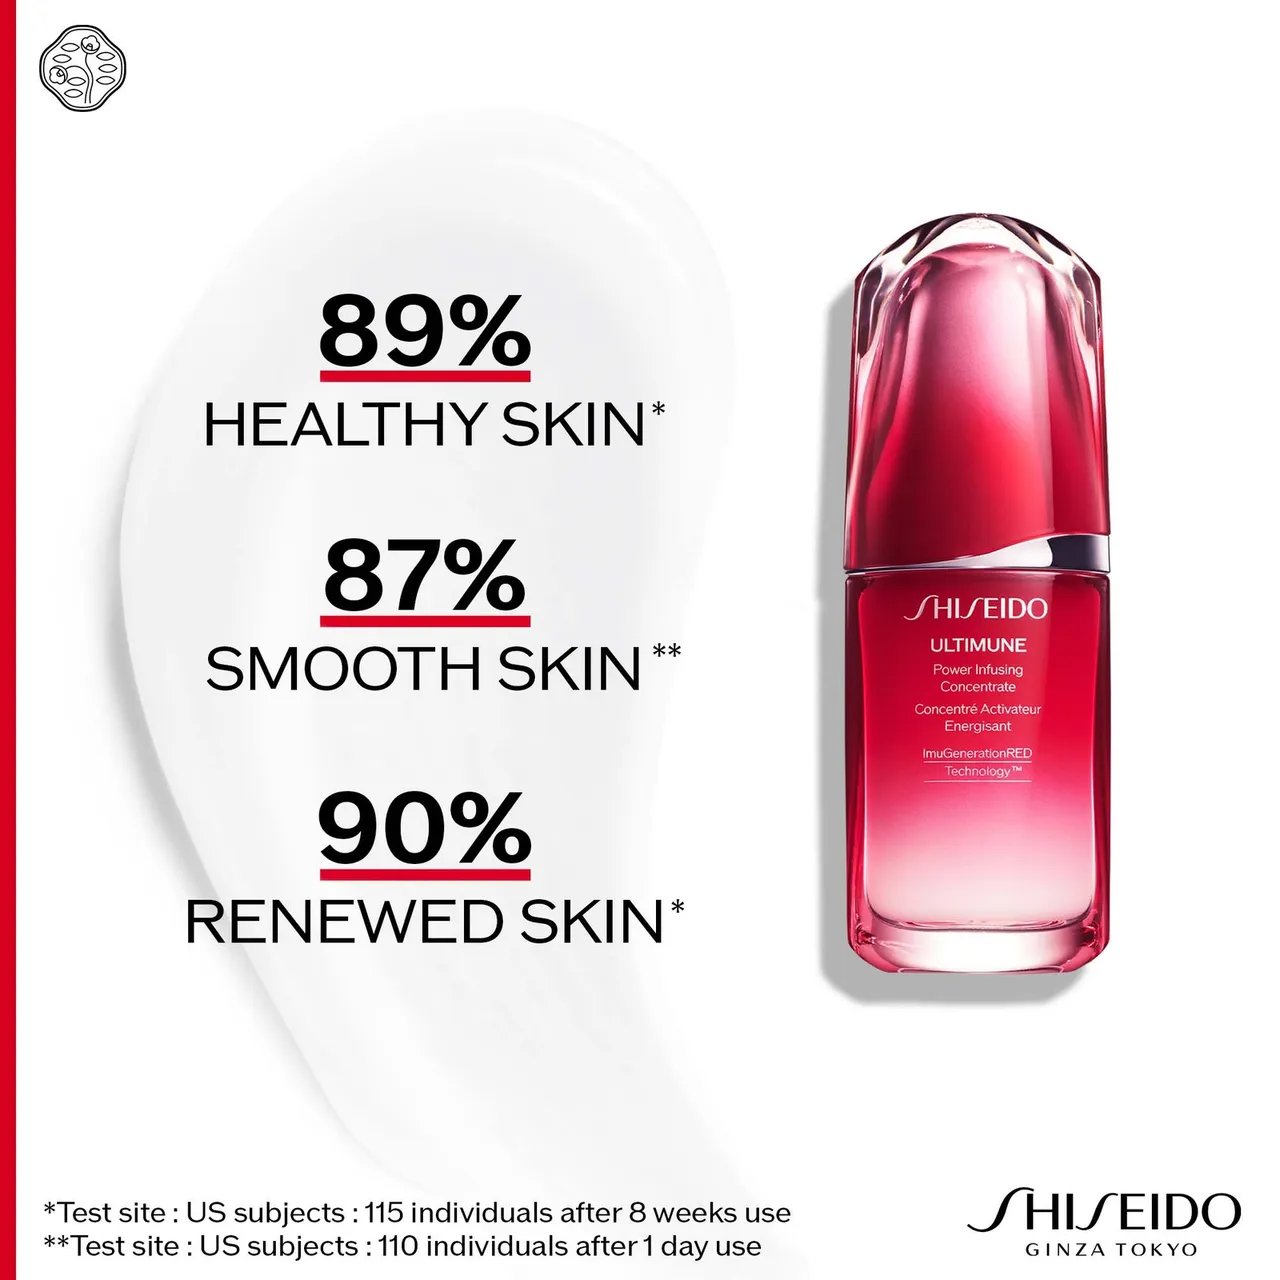 Shiseido Ultimune Power Infusing Concentrate (Various Sizes) - 75ml